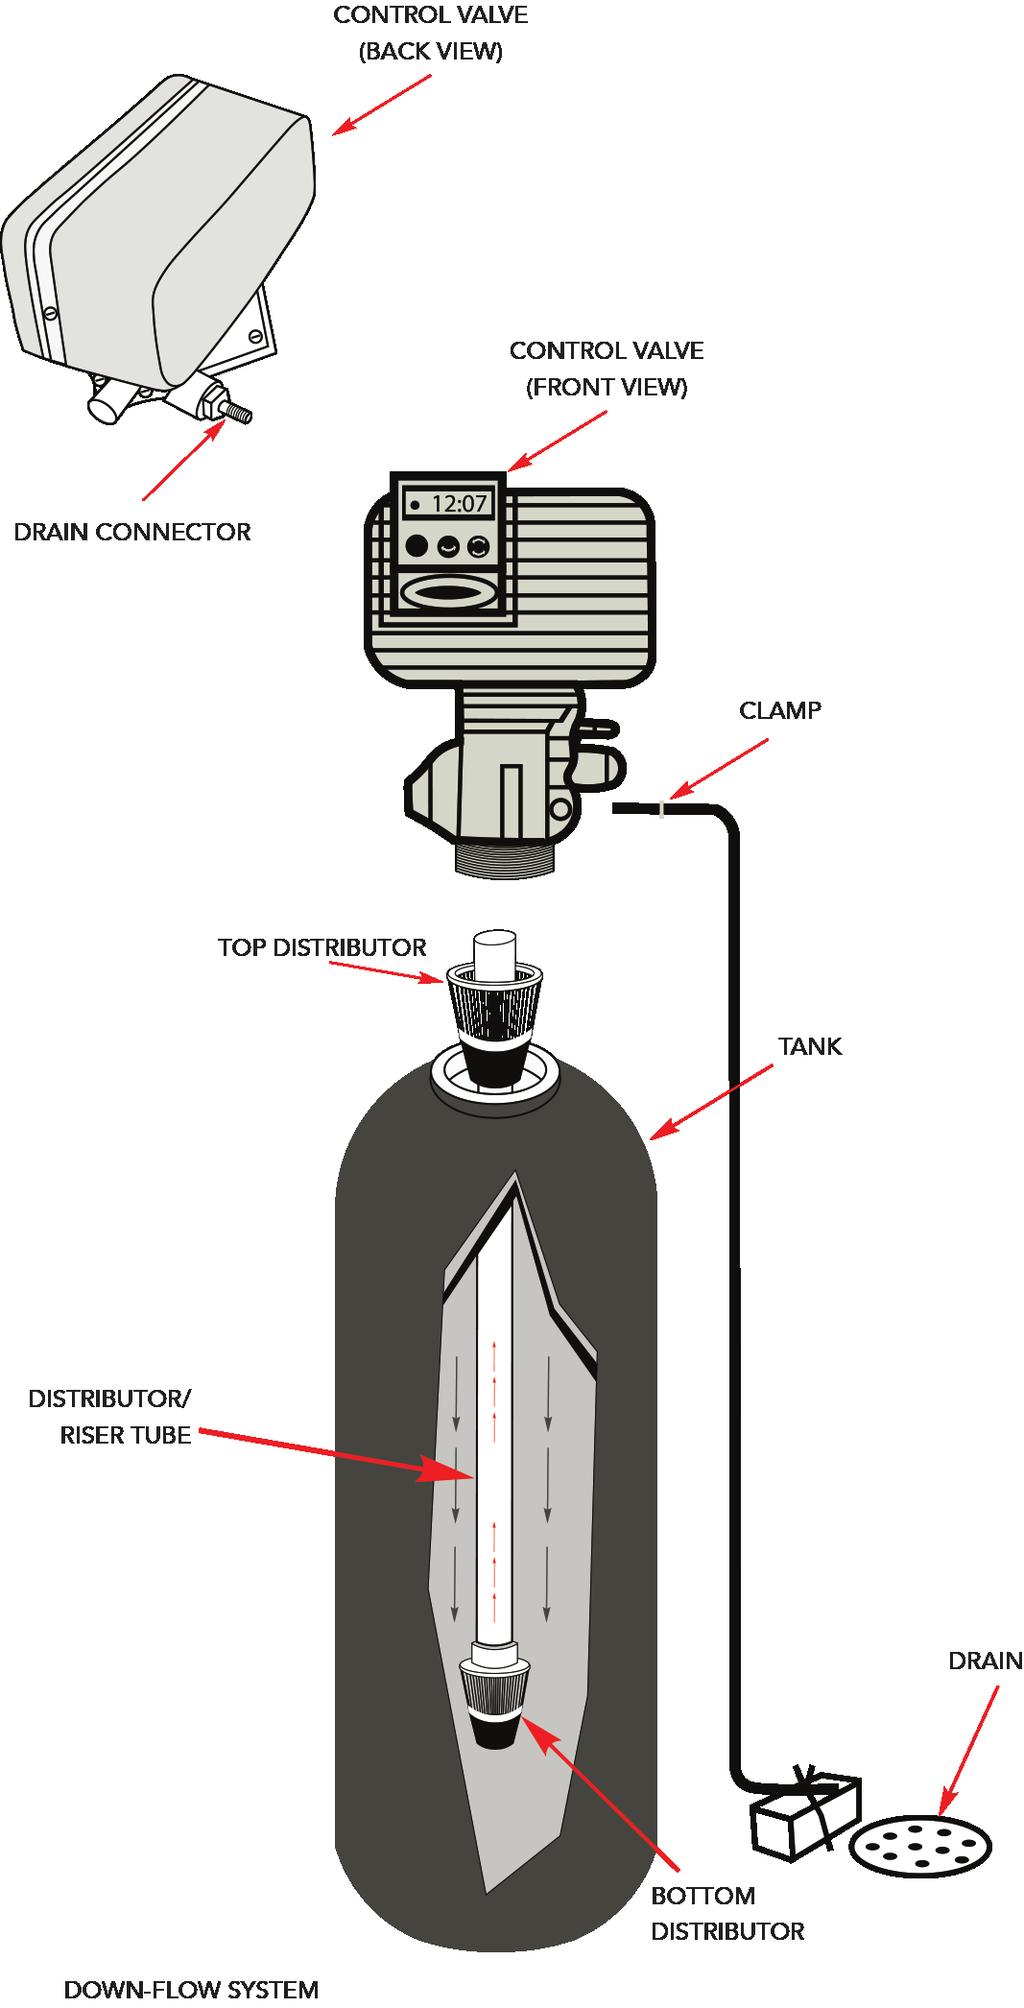 DOWNFLOW WITH NO BACKWASH WATER FILTER SYSTEMS Unpack the control valve from